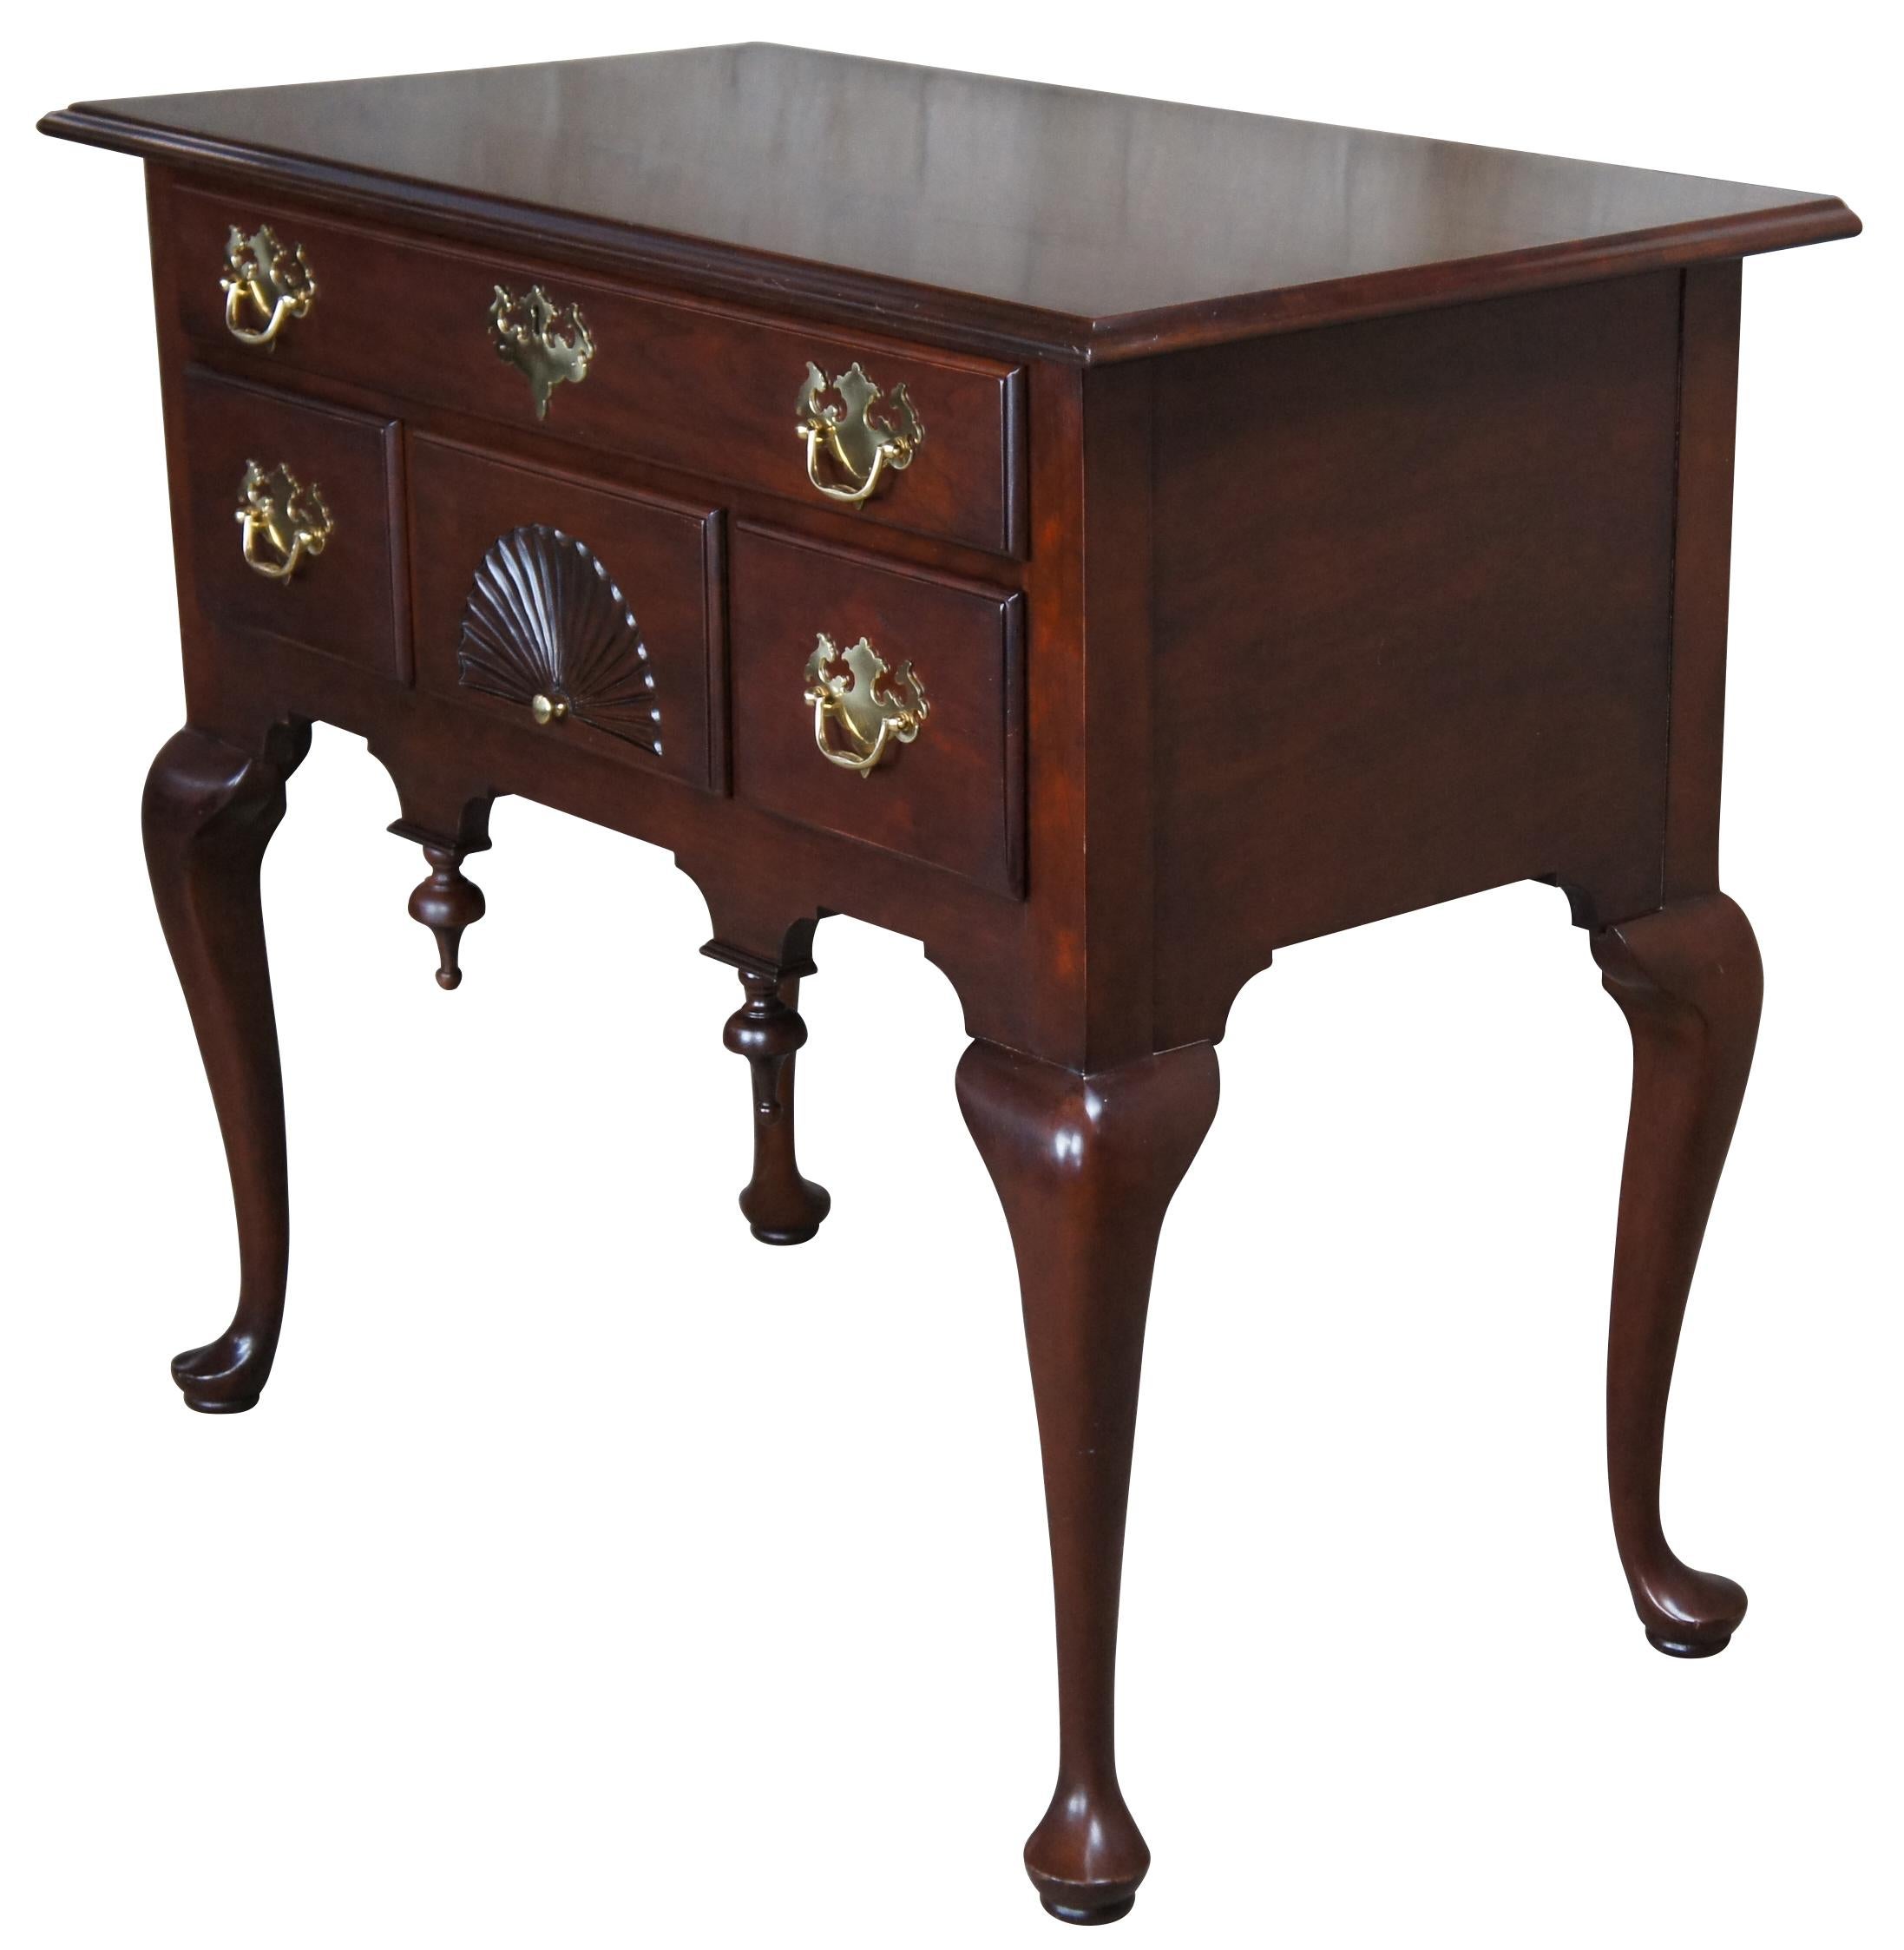 Vintage cherry lowboy from Statton's Private Collection, featuring Queen Anne and Federal styling with a rectangular top over four drawers with brass hardware, serpentine legs, pad feet, carved fan and drop pendants.

Statton Furniture was a